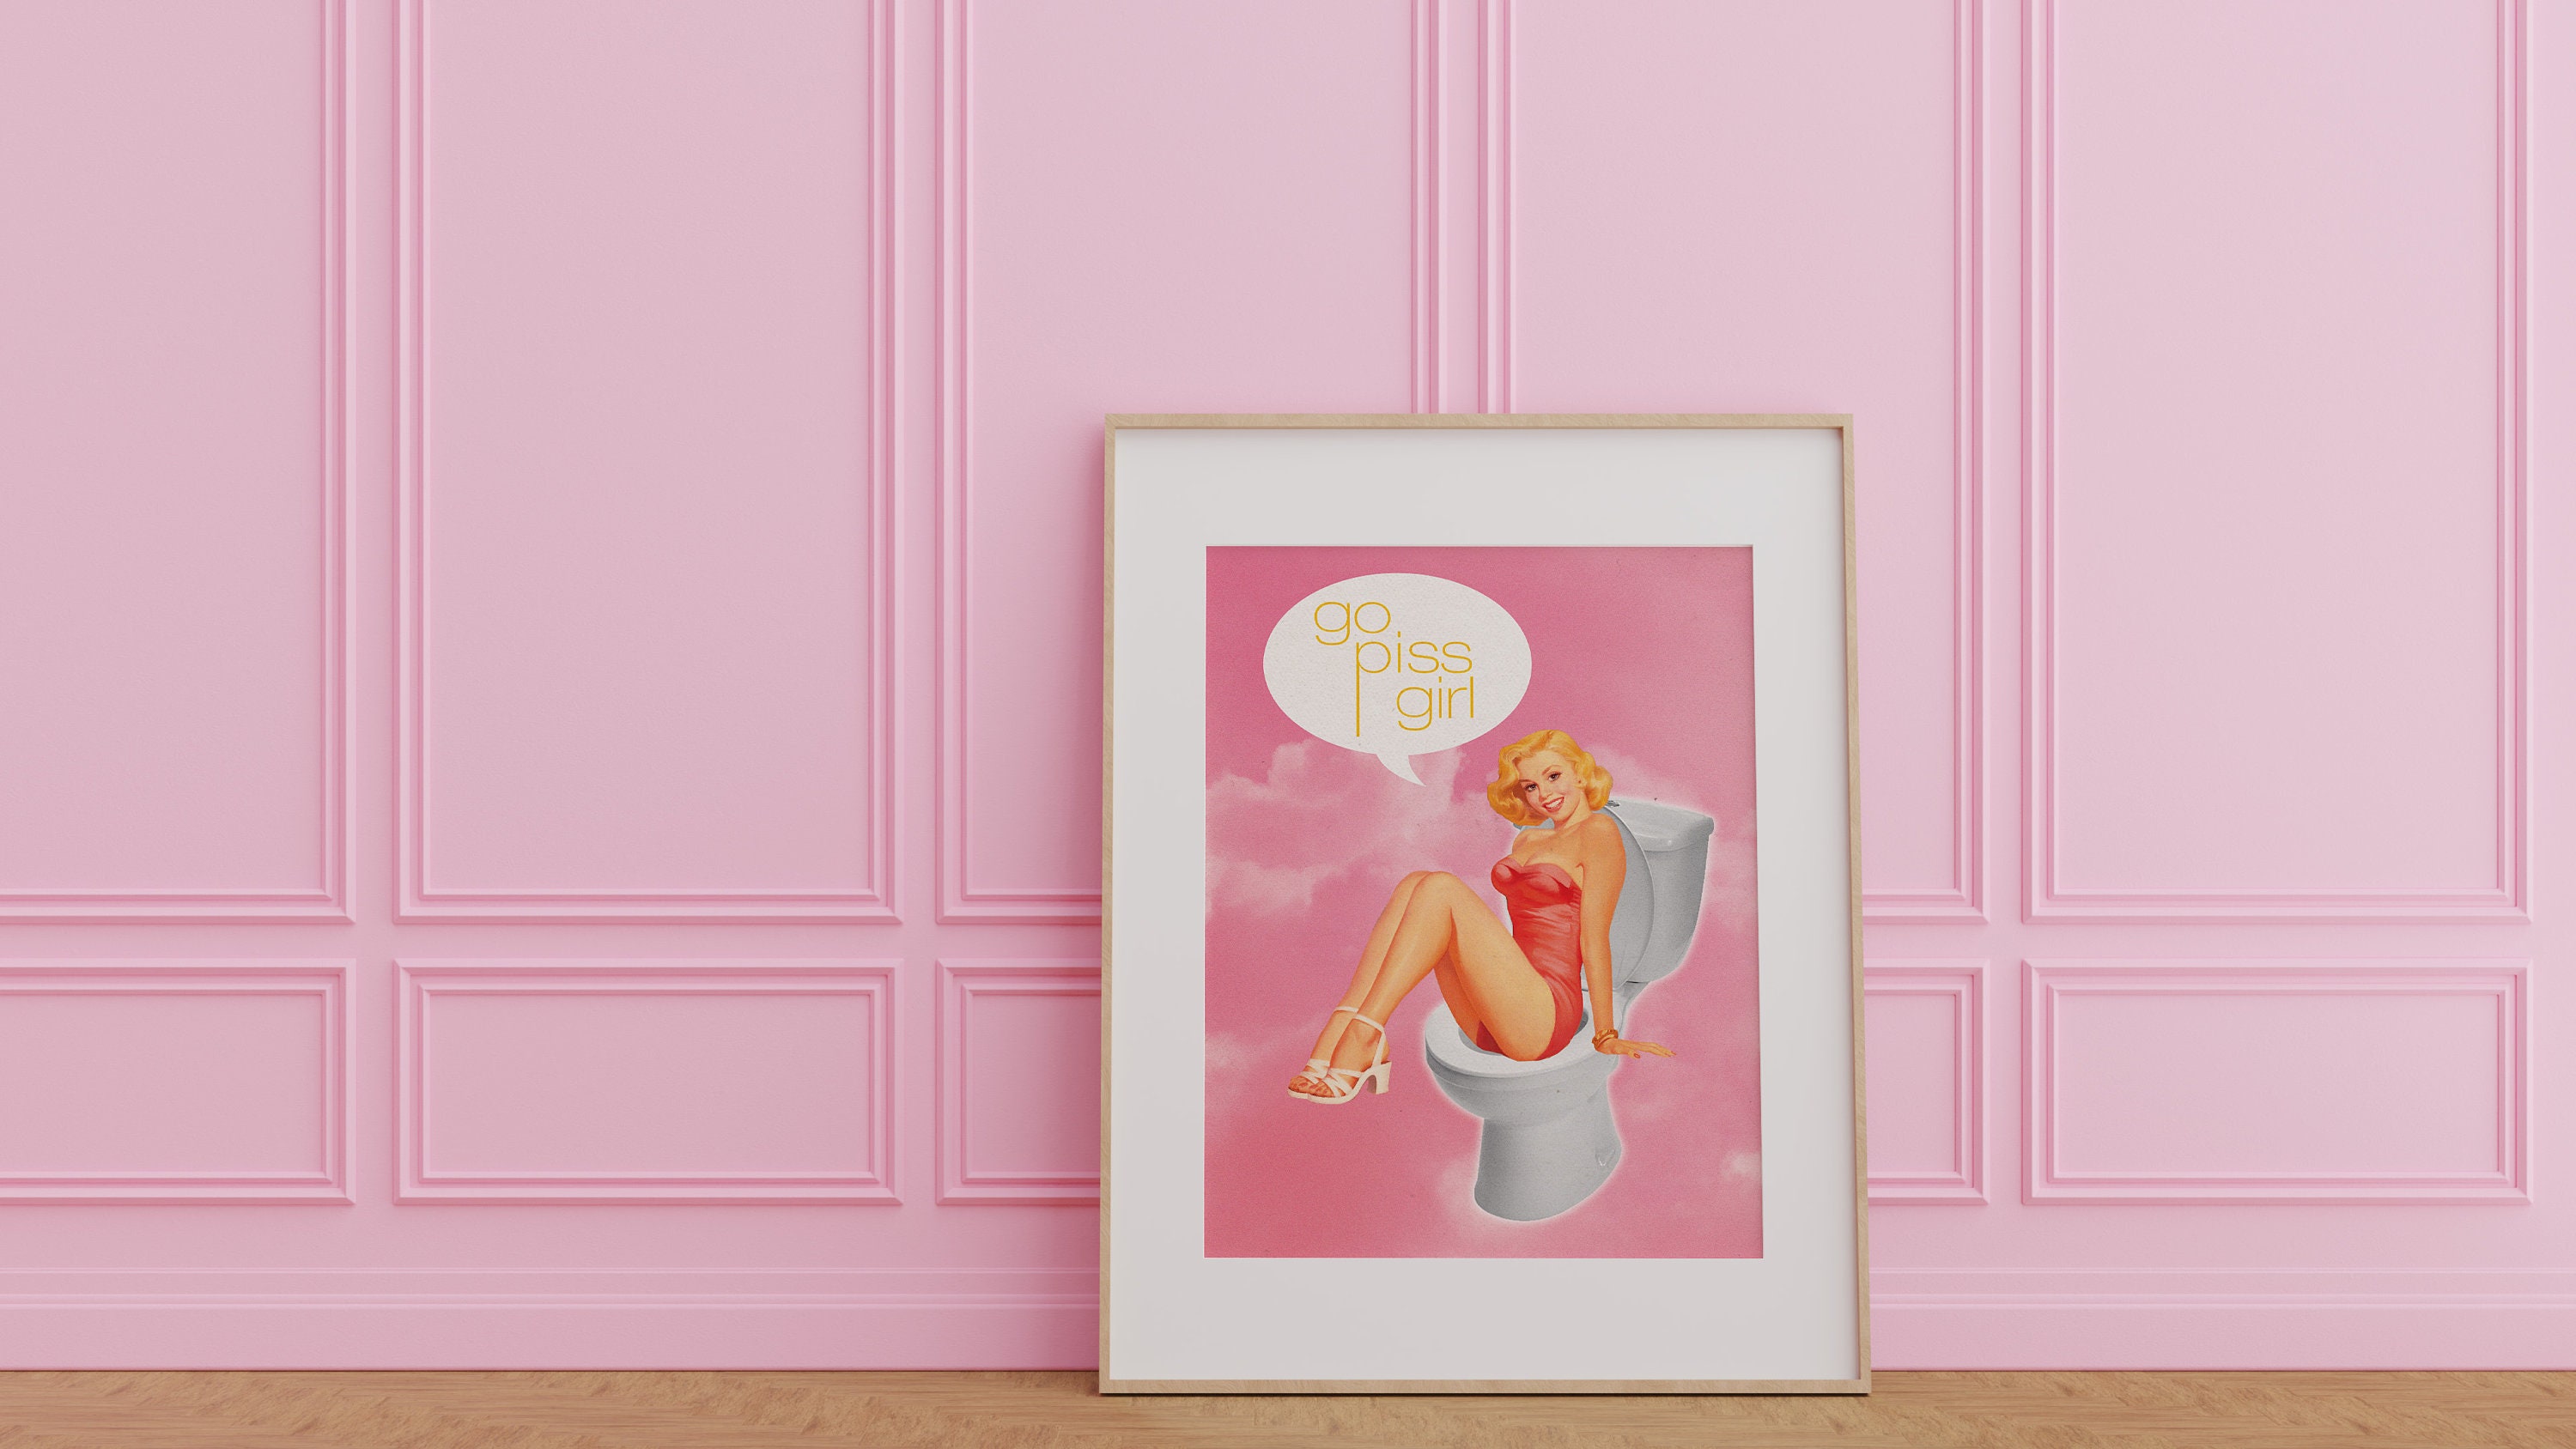 Funny Go Piss Girl Pink Print, Trendy Bathroom Quote Poster